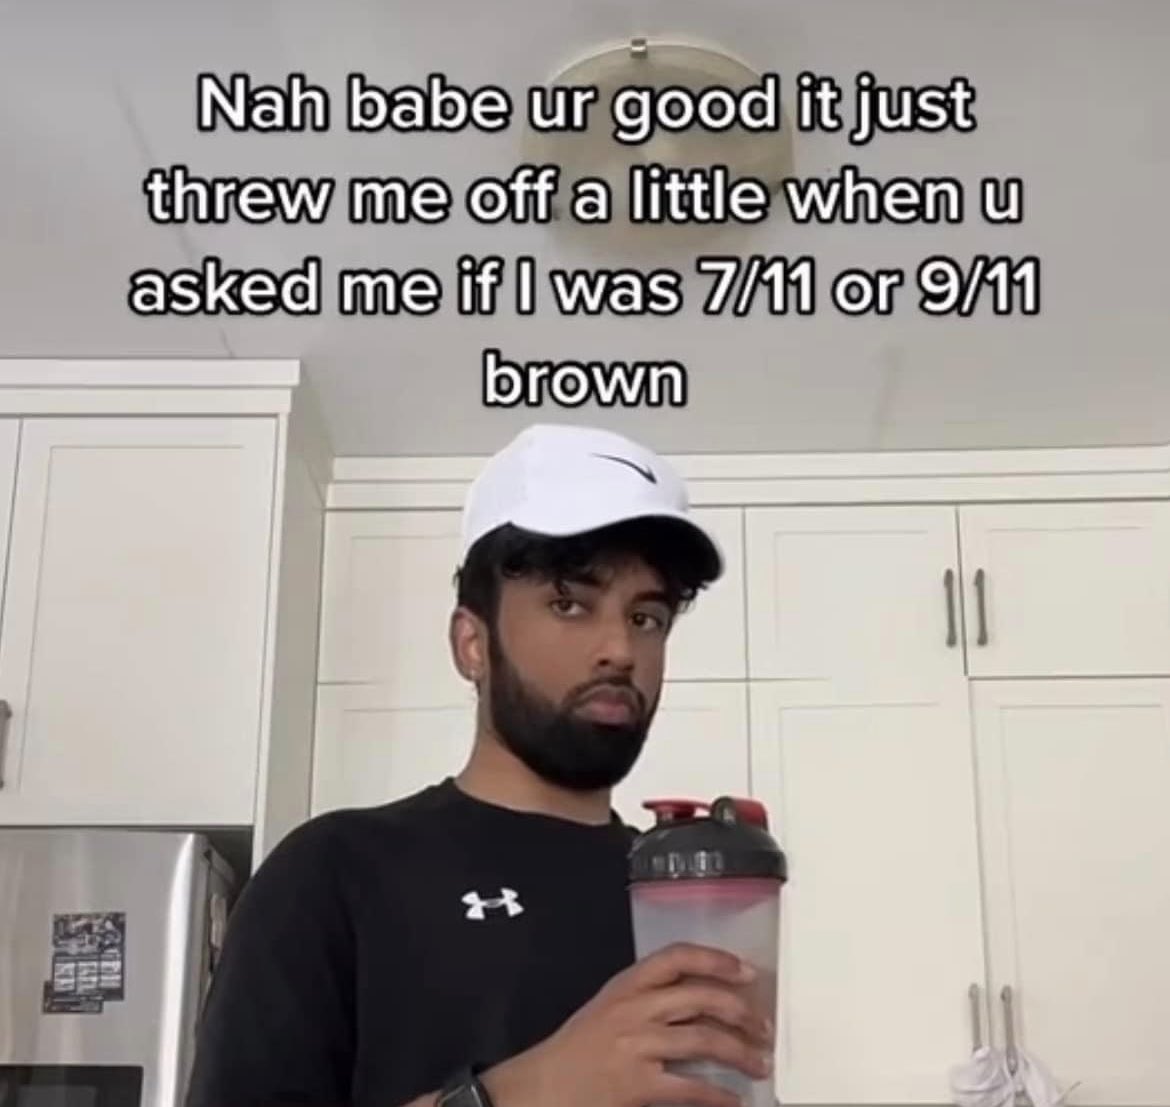 wild tiktok screenshots - photo caption - Nah babe ur good it just threw me off a little when u asked me if I was 711 or 911 brown